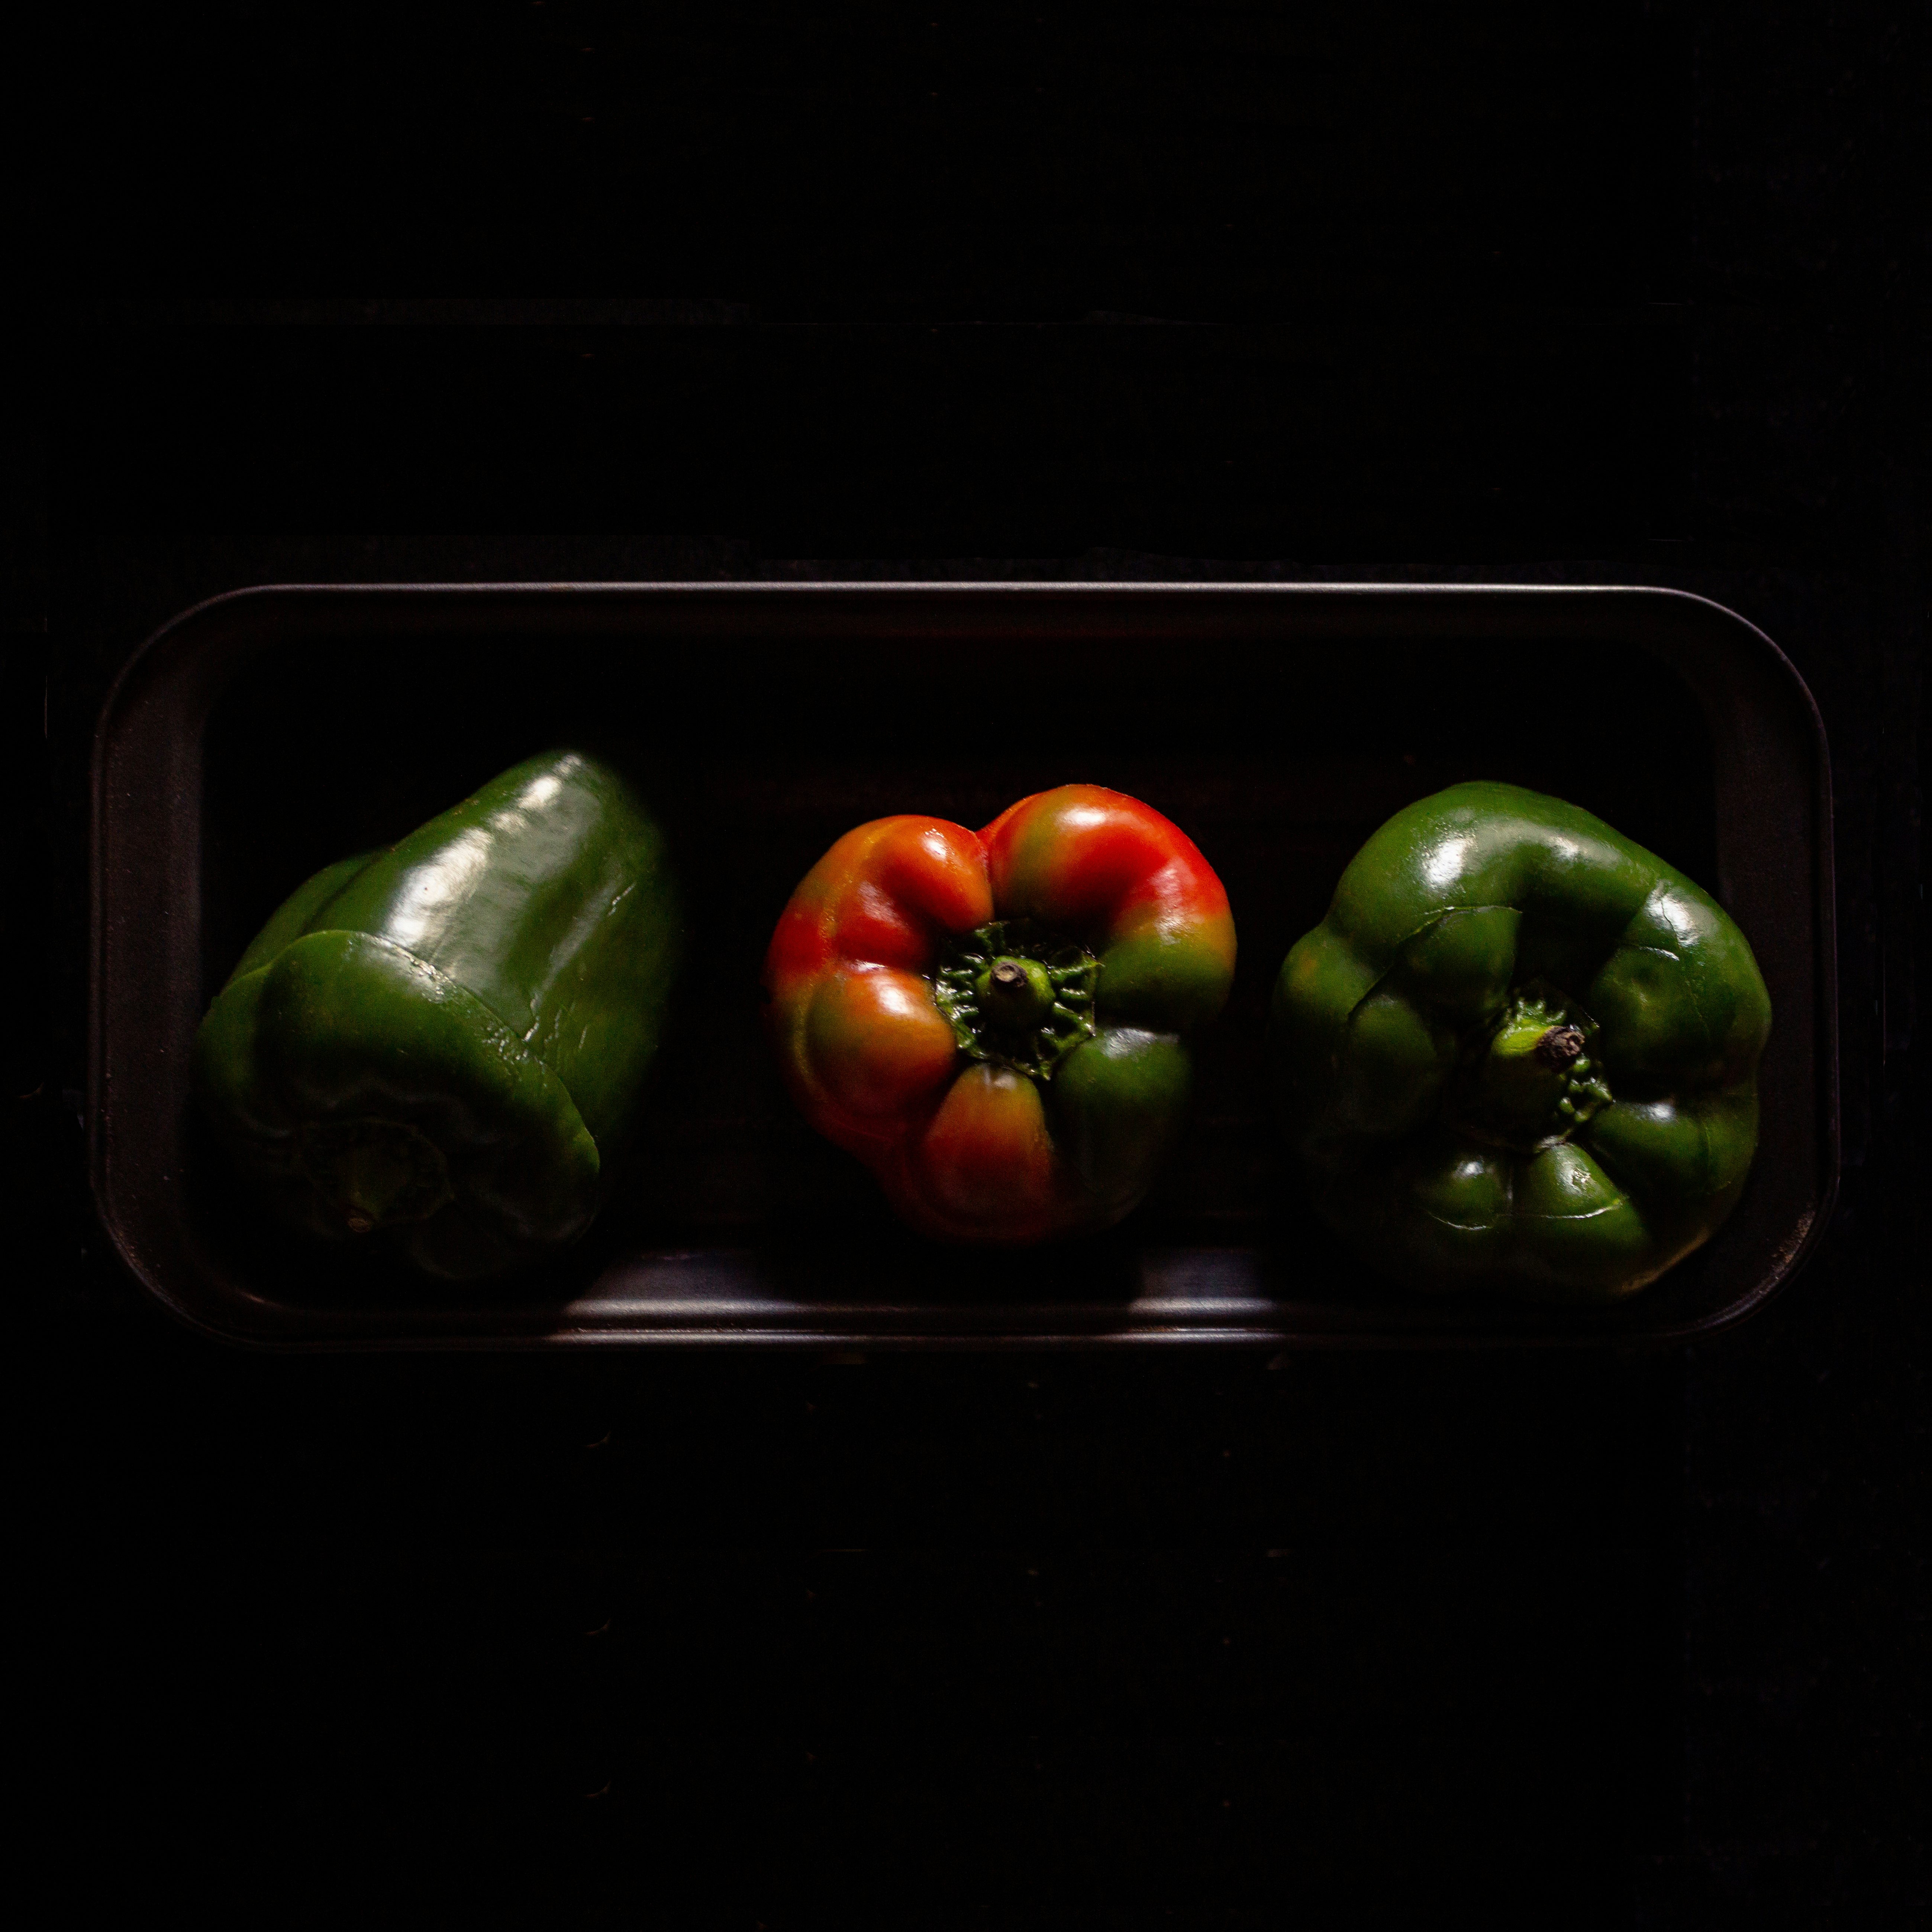 three orange and green bell peppers on black plate